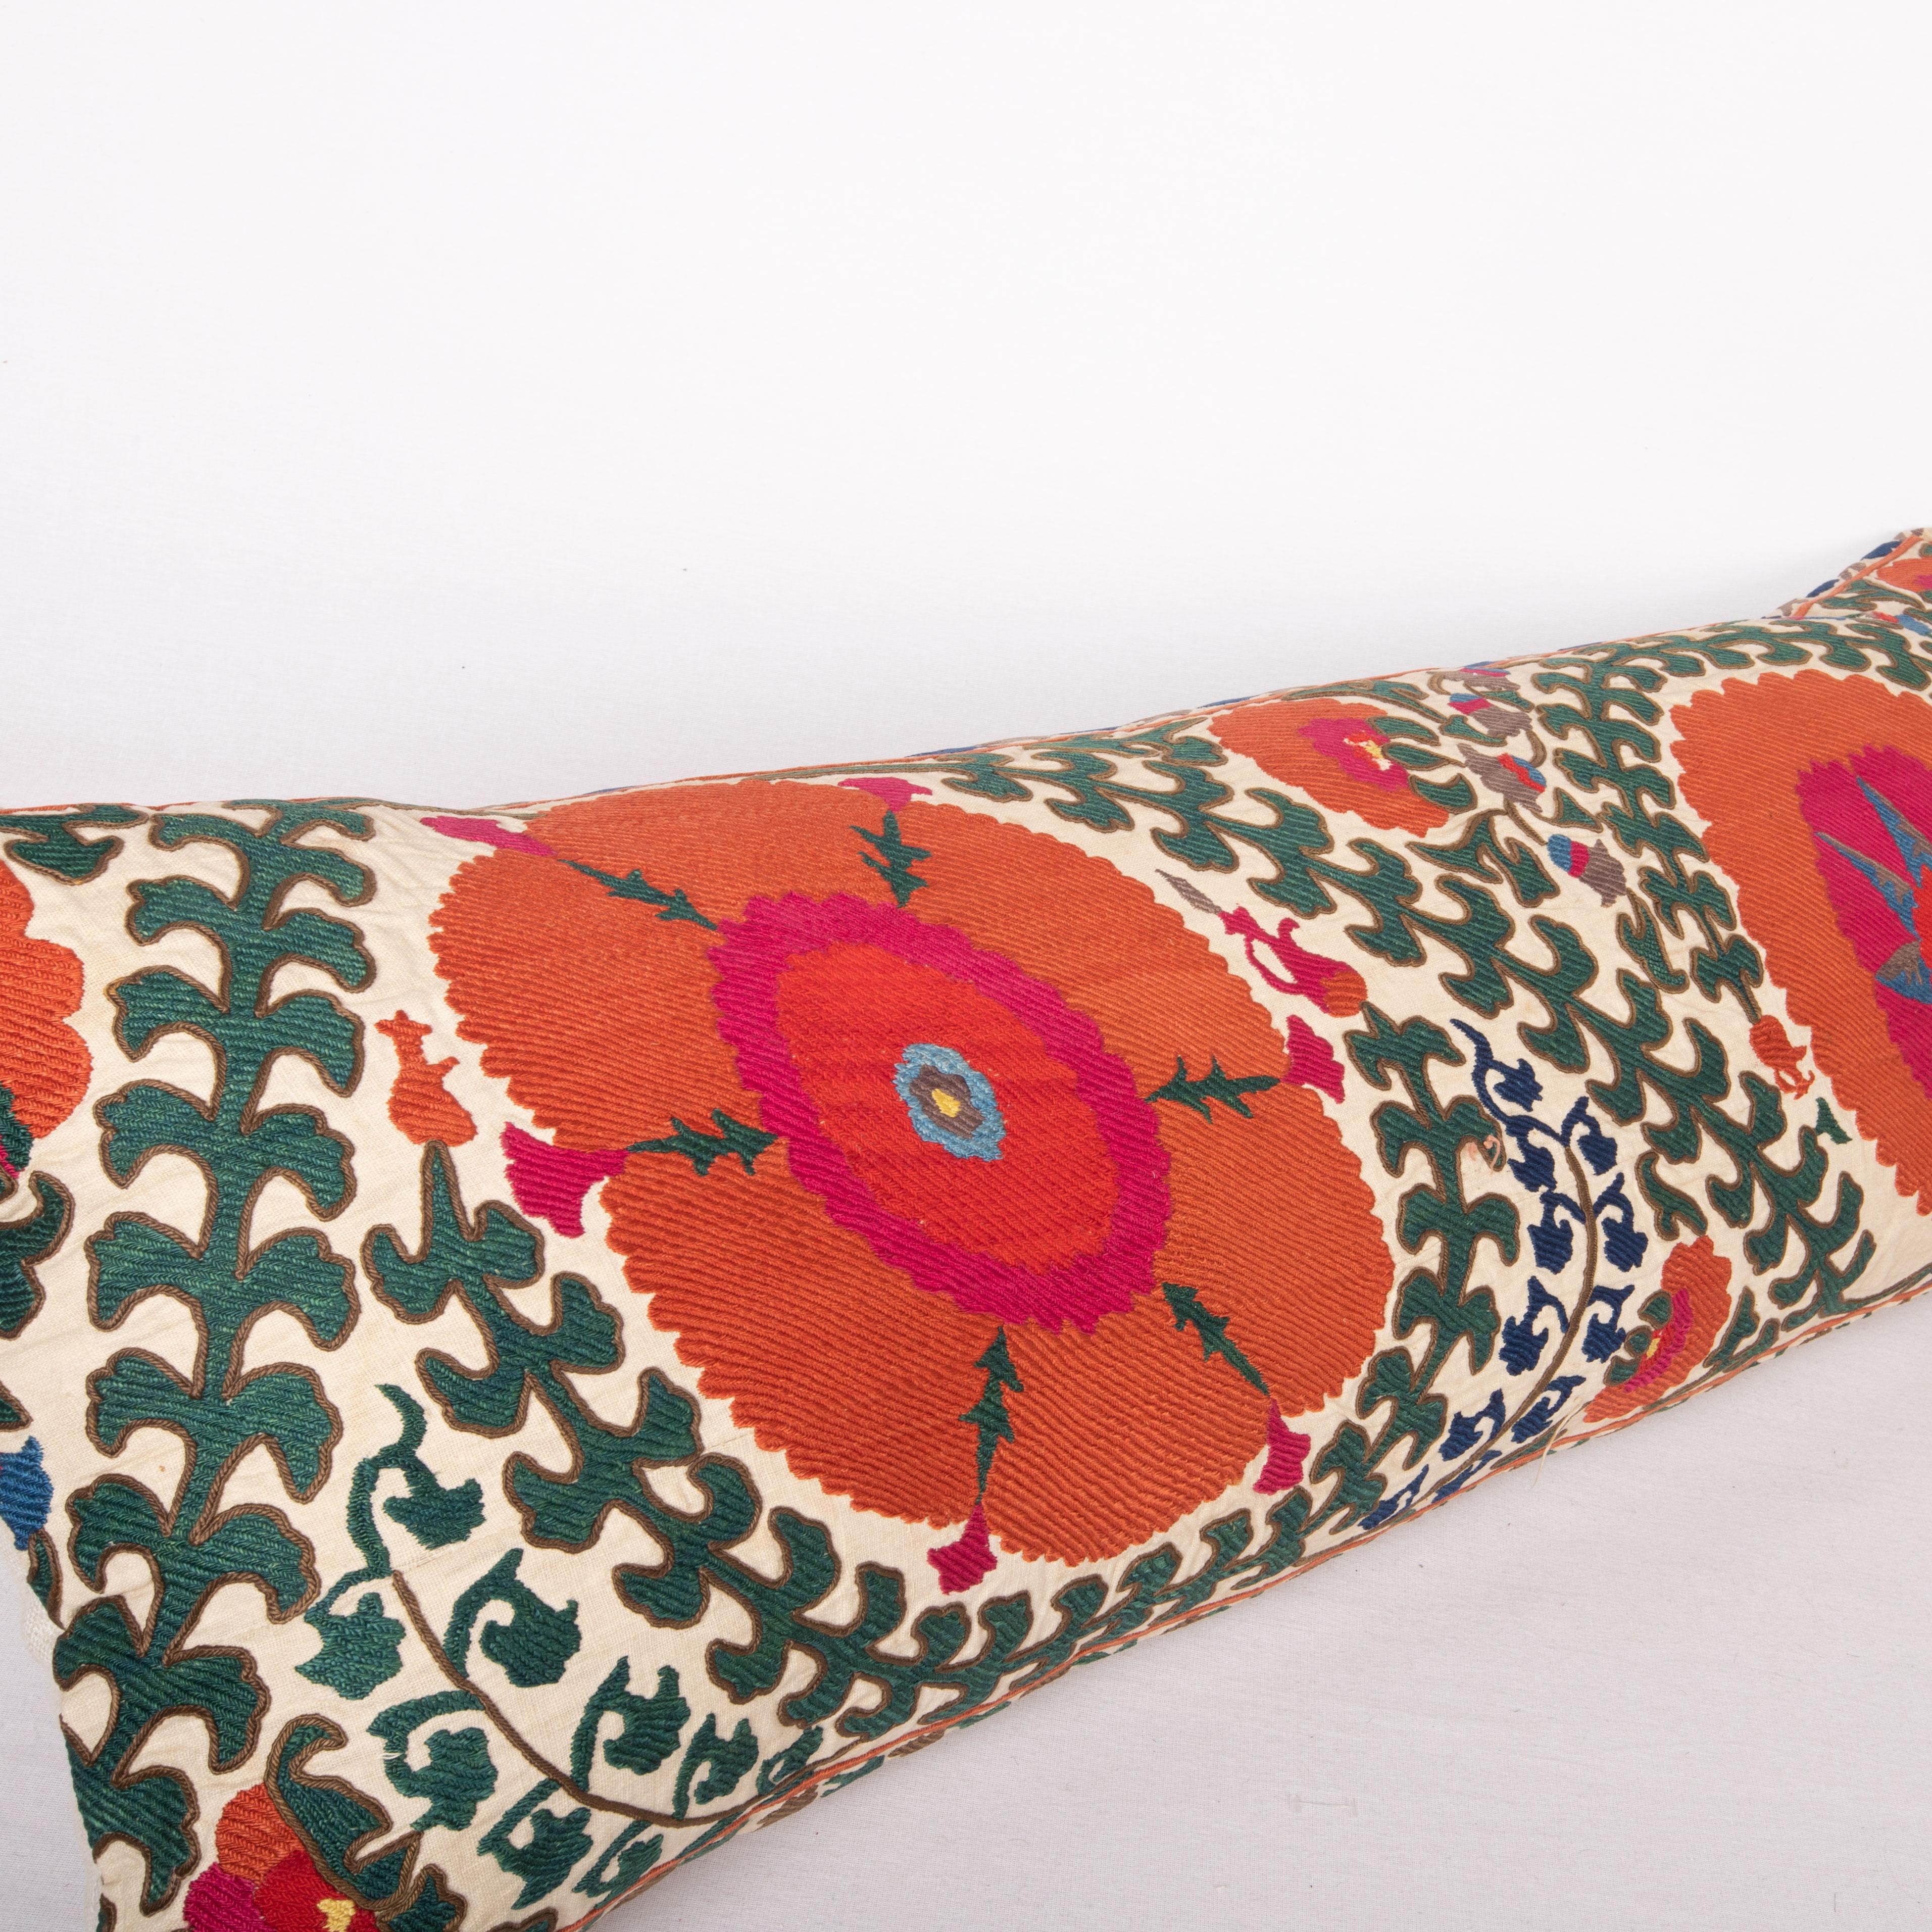 Silk Antique Suzani Pillow Case Made from a Mid-1860s Bukhara Suzani